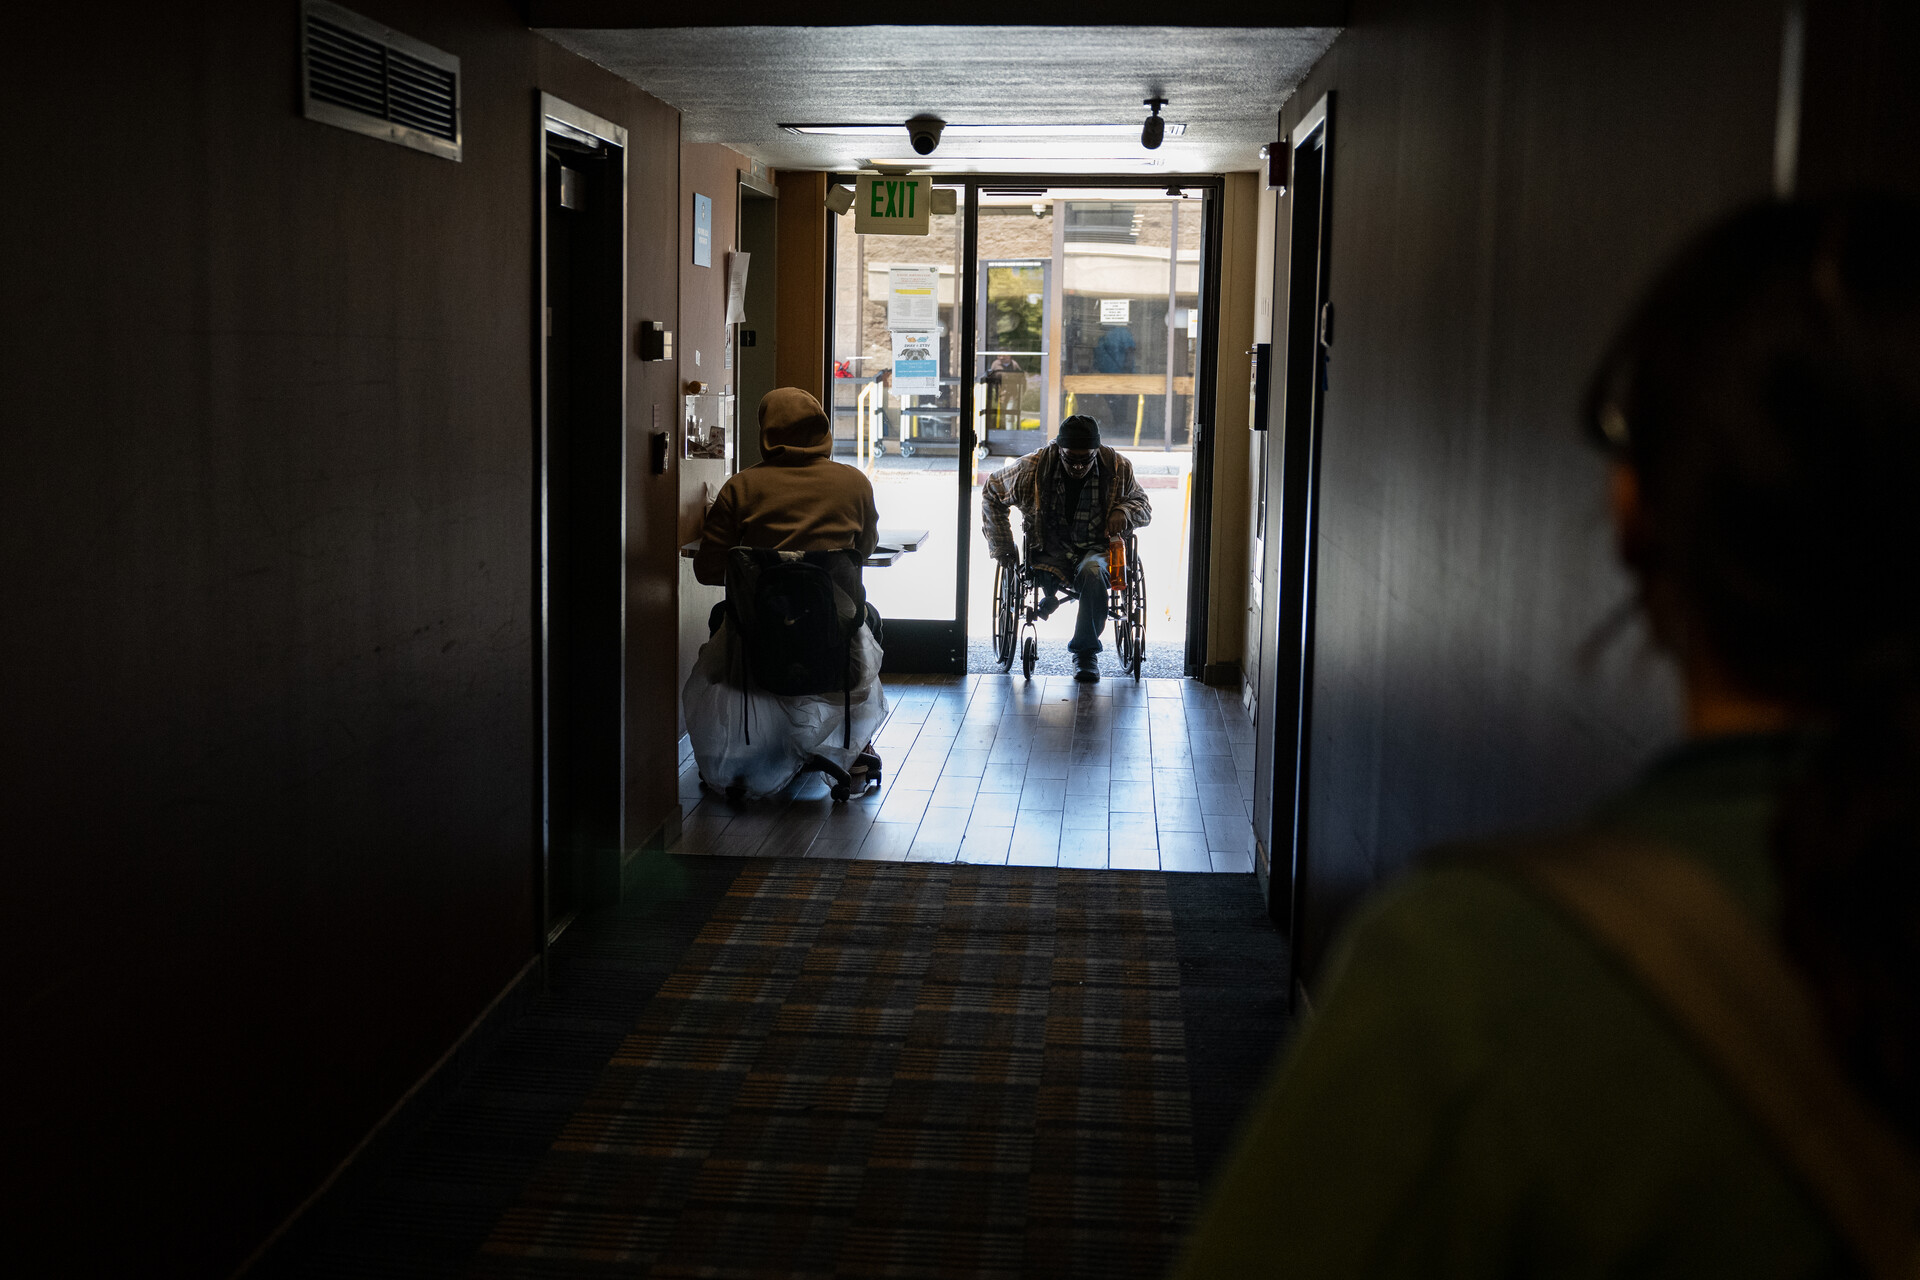 A man in a wheelchair enters a building from outside, seen in the distance backlit by daylight down a long, darkened hallway